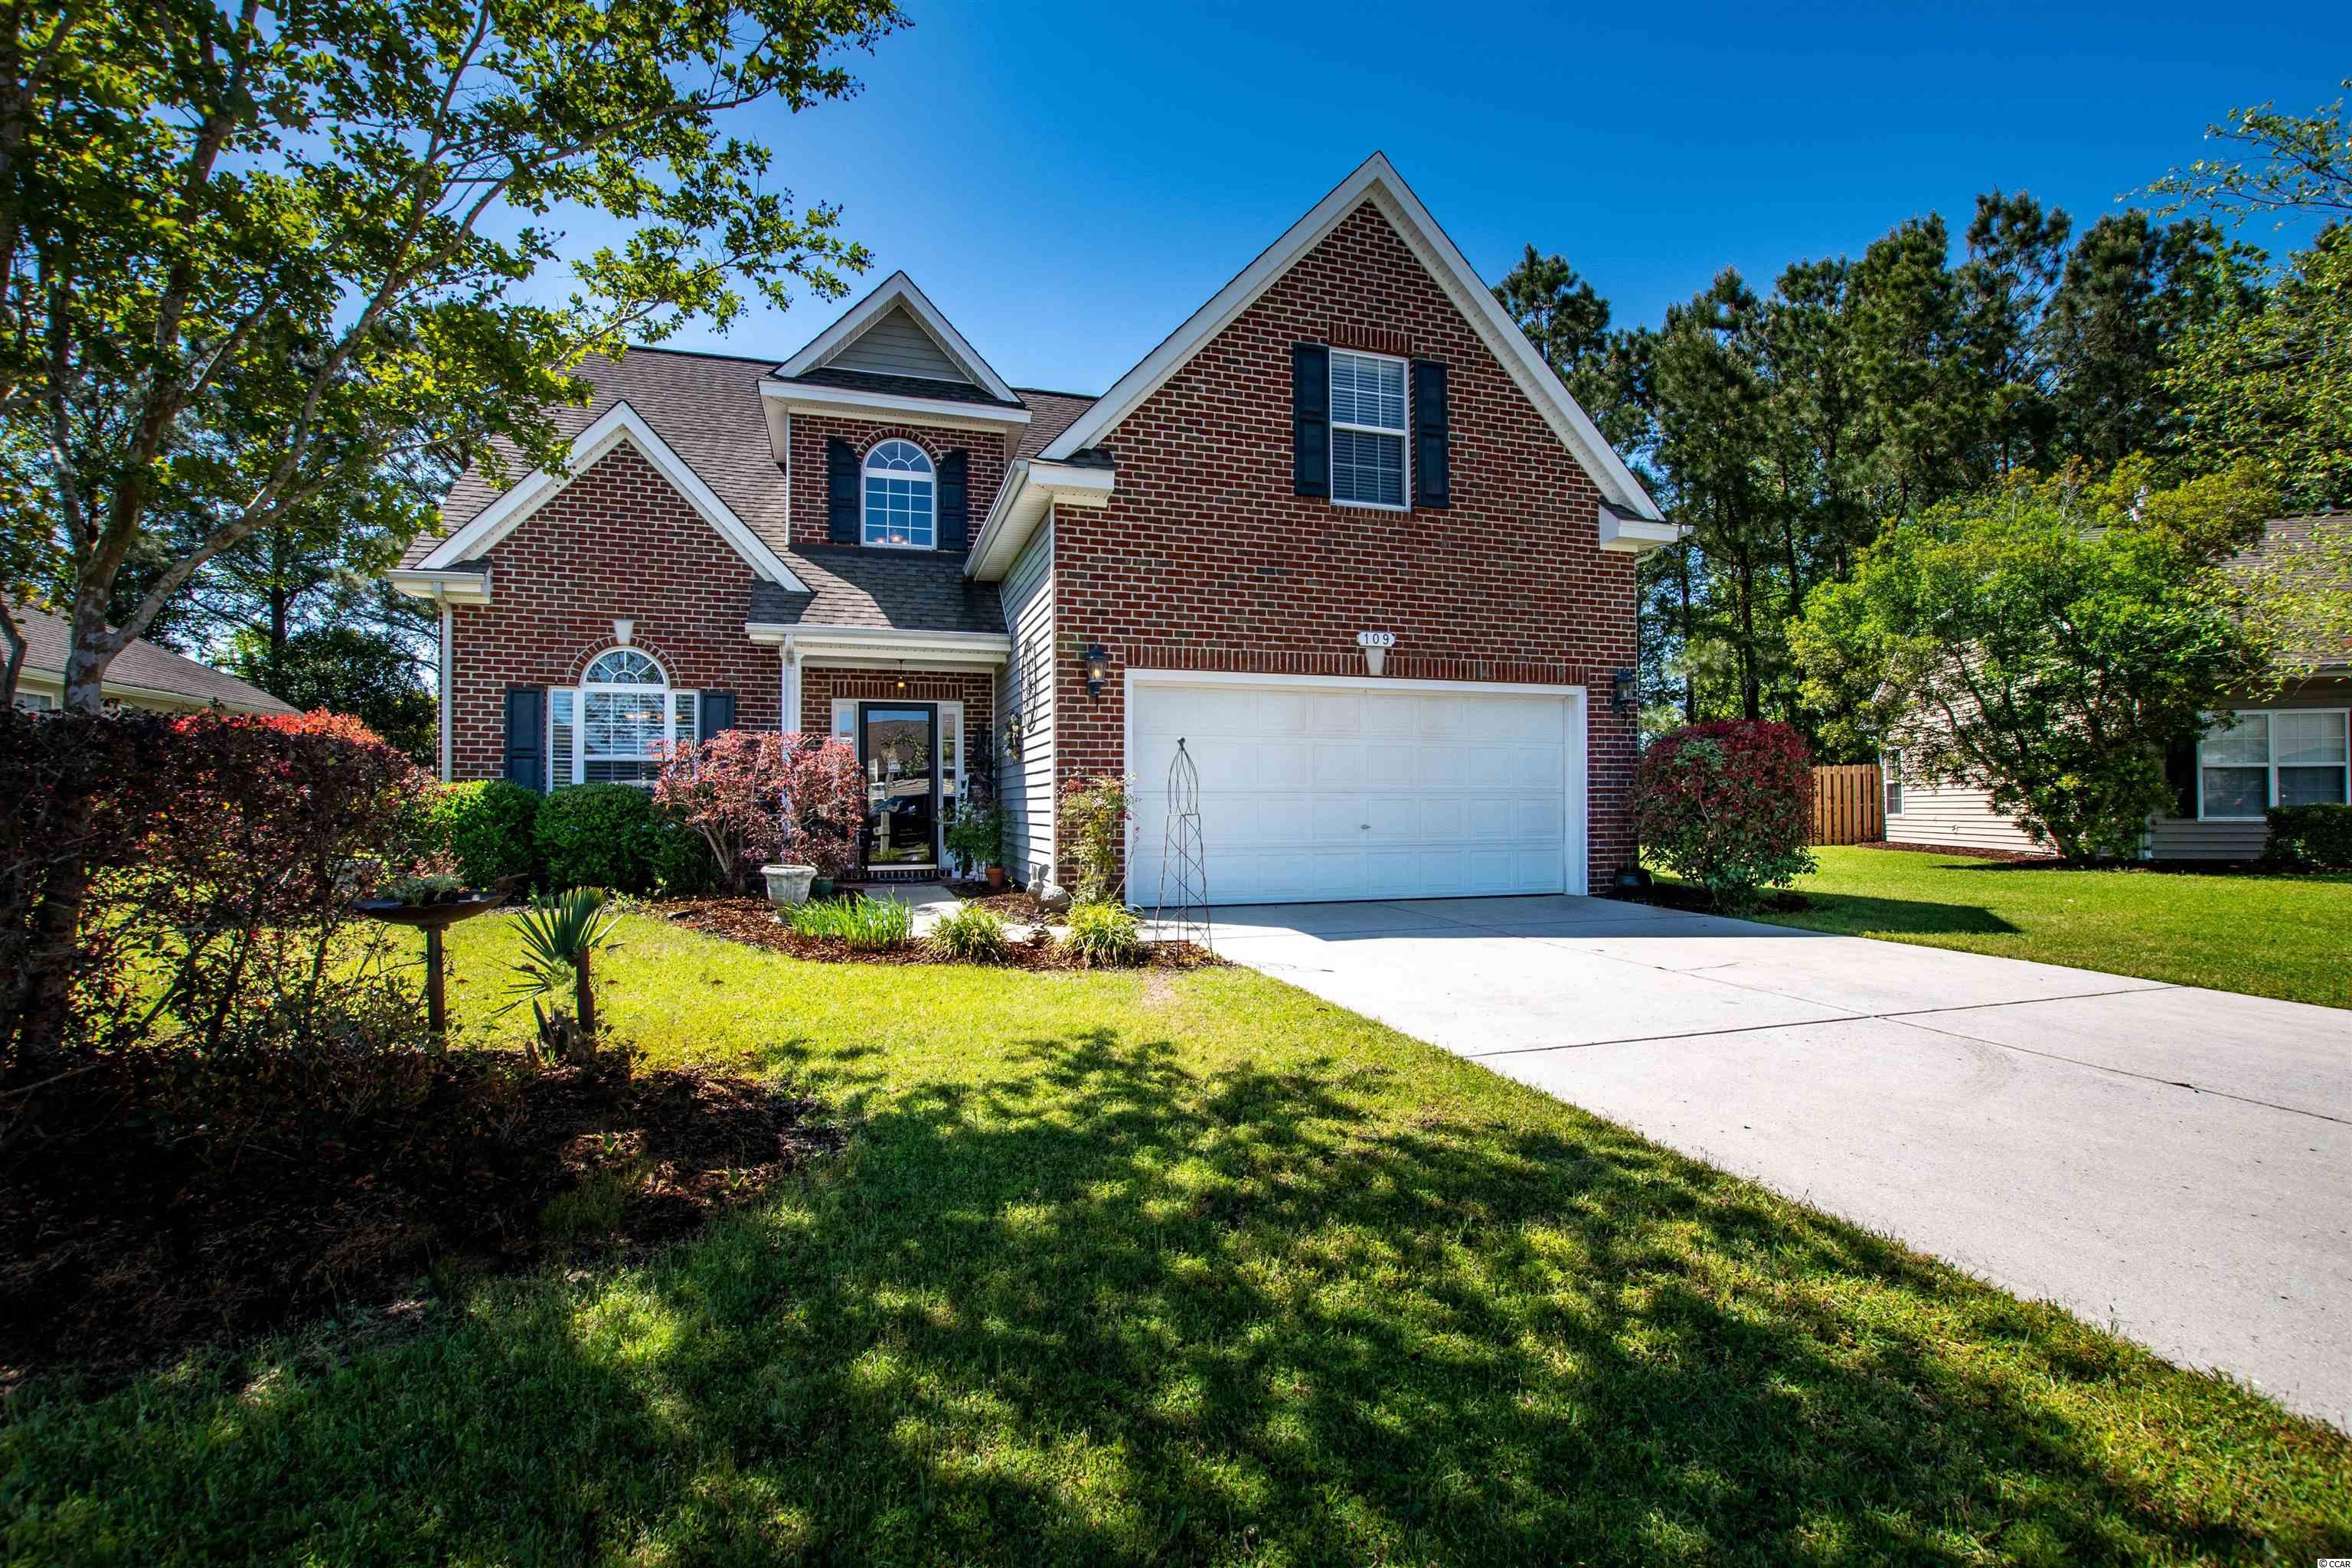 109 Carriage Lake Dr. Little River, SC 29566